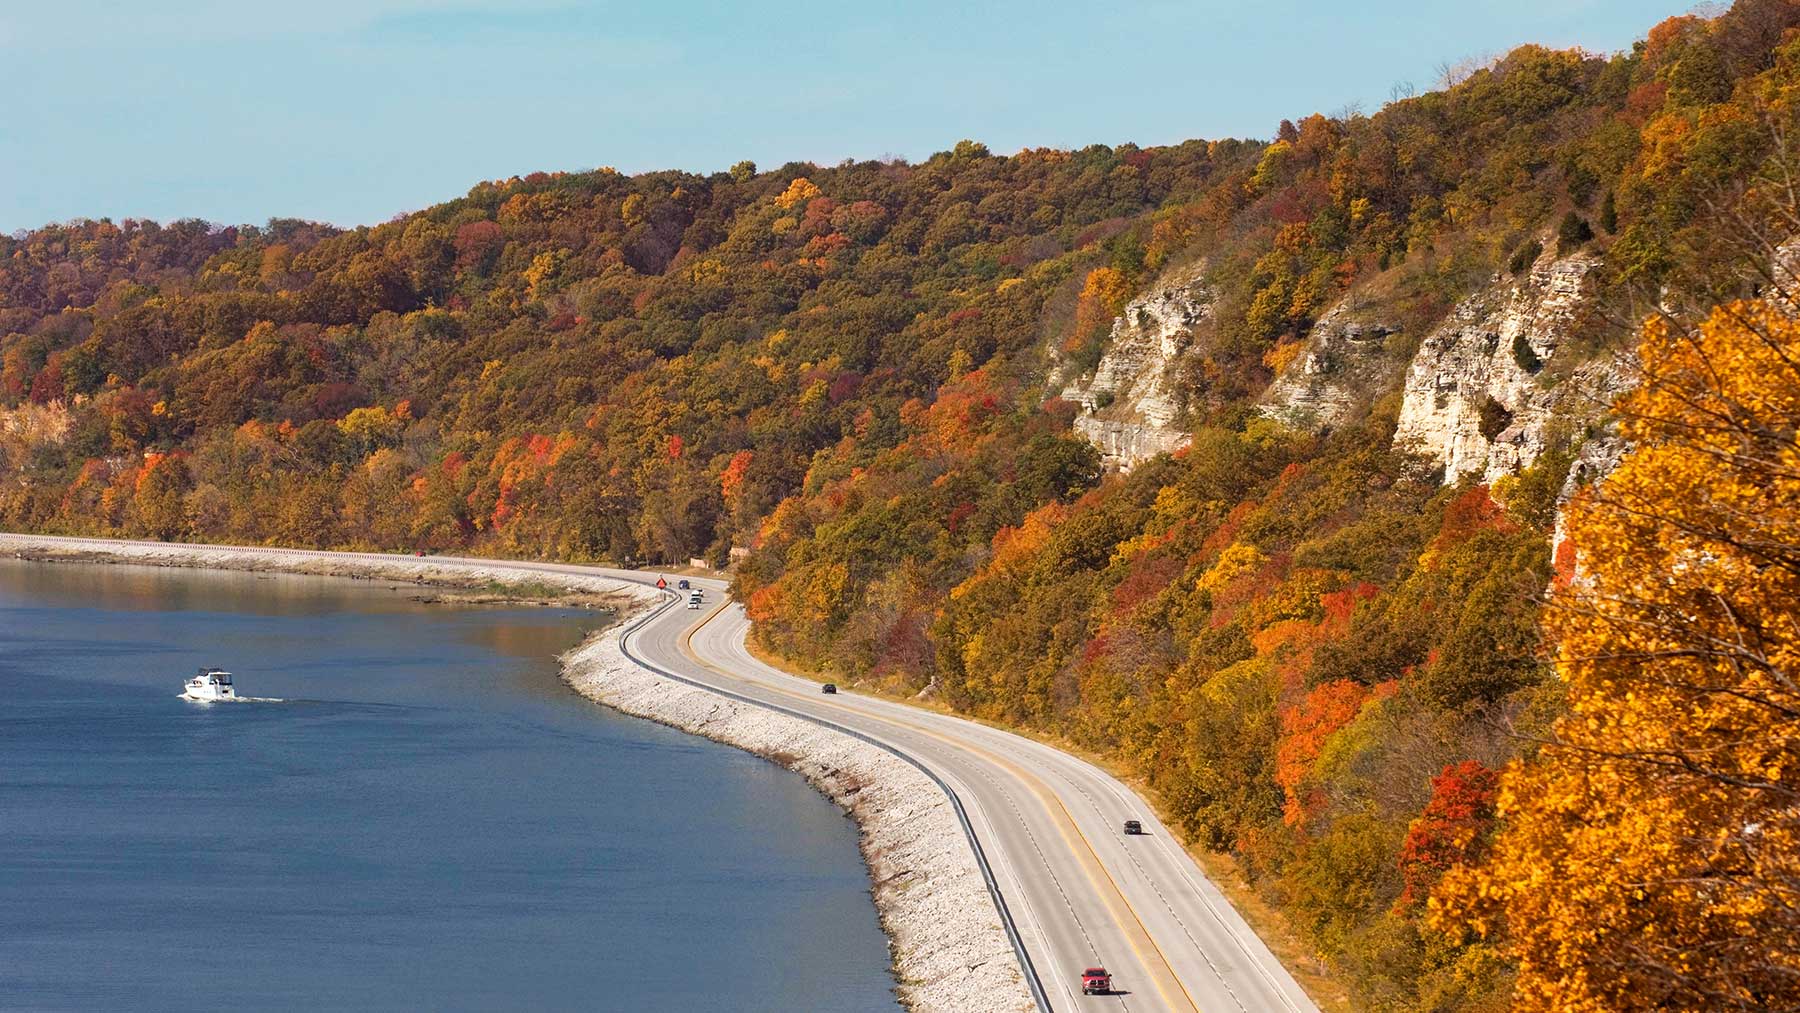 Fall scenery along the Great River Road